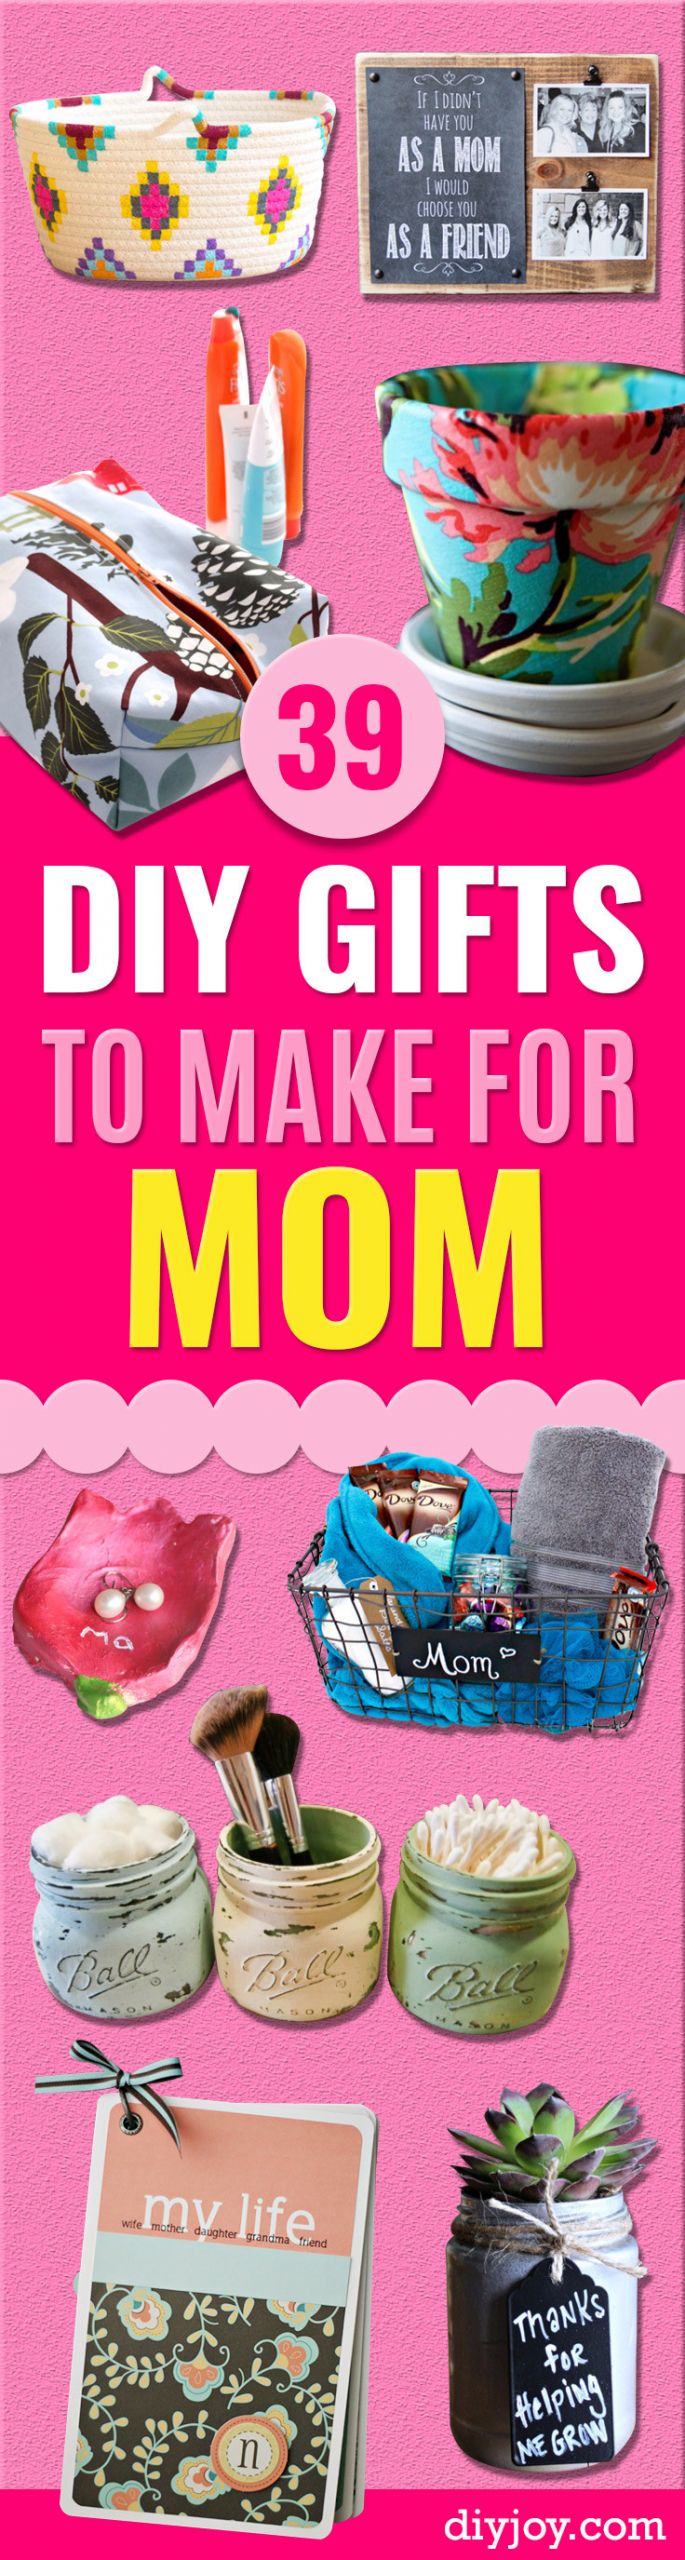 DIY Gifts For Your Mom
 39 Creative DIY Gifts to Make for Mom